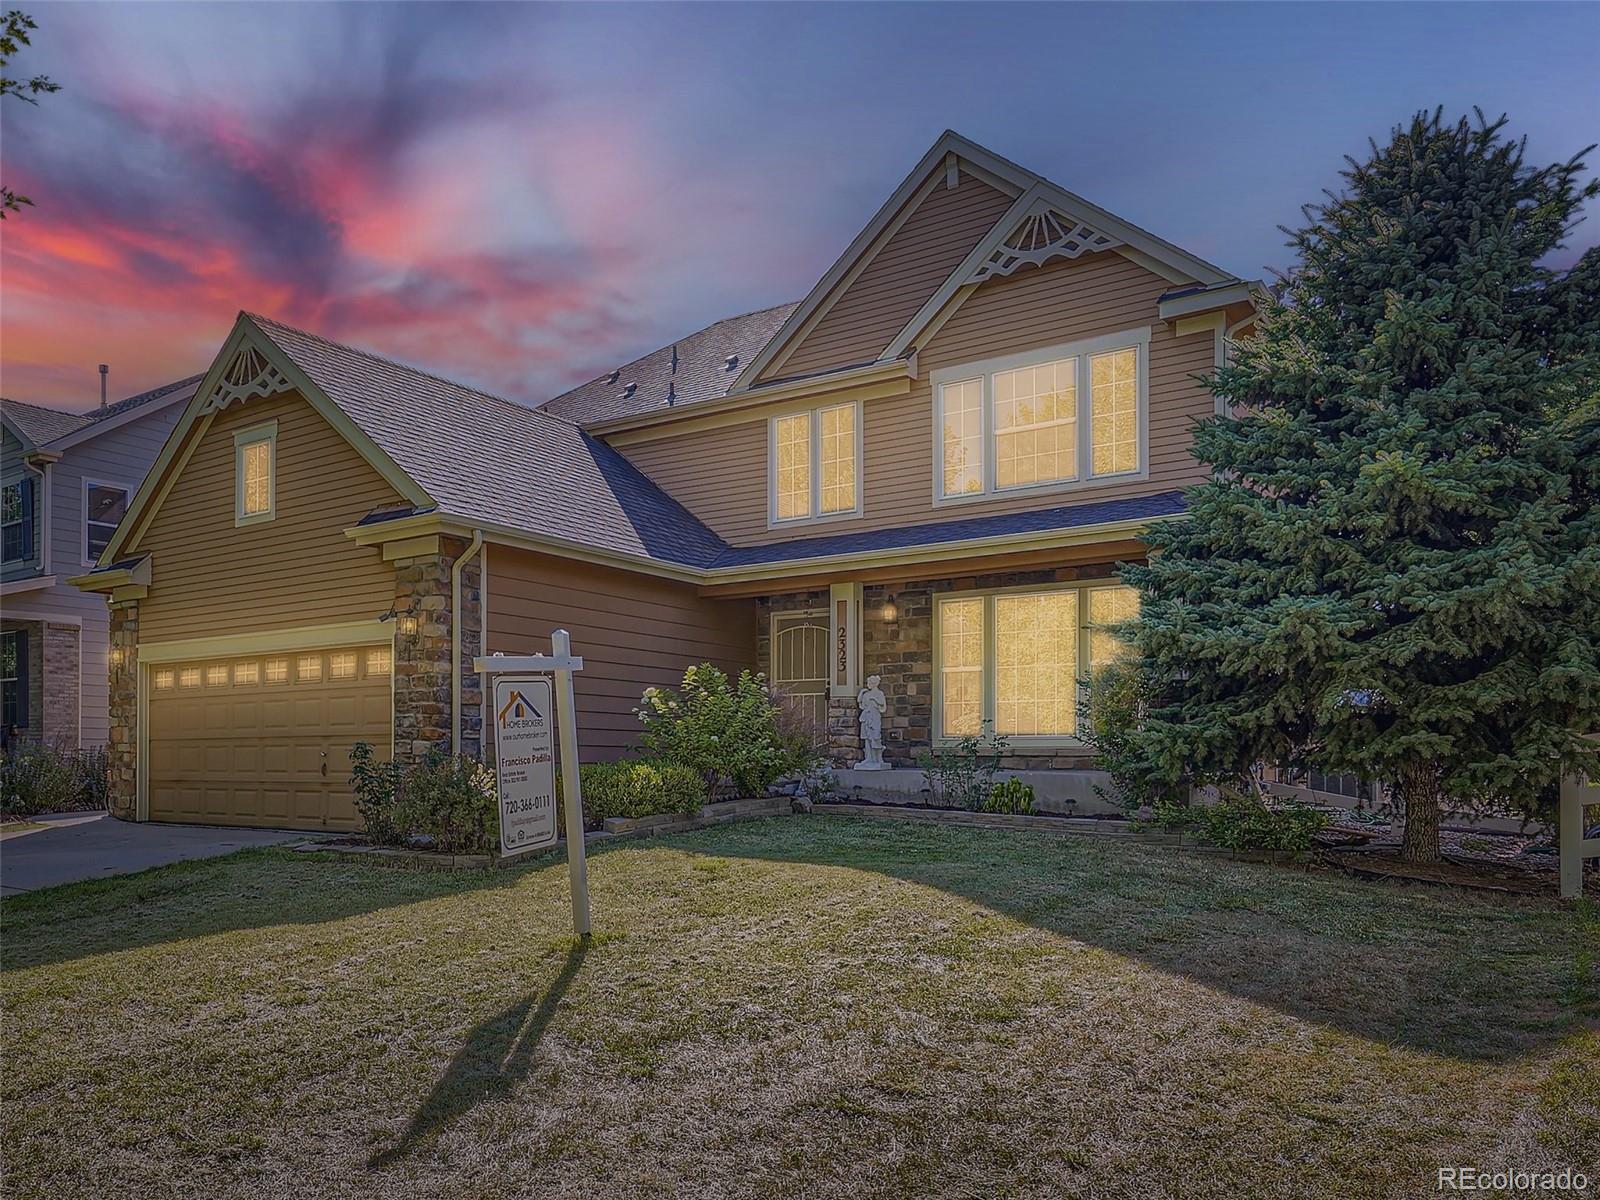 Report Image for 2323  Harmony Park Drive,Westminster, Colorado